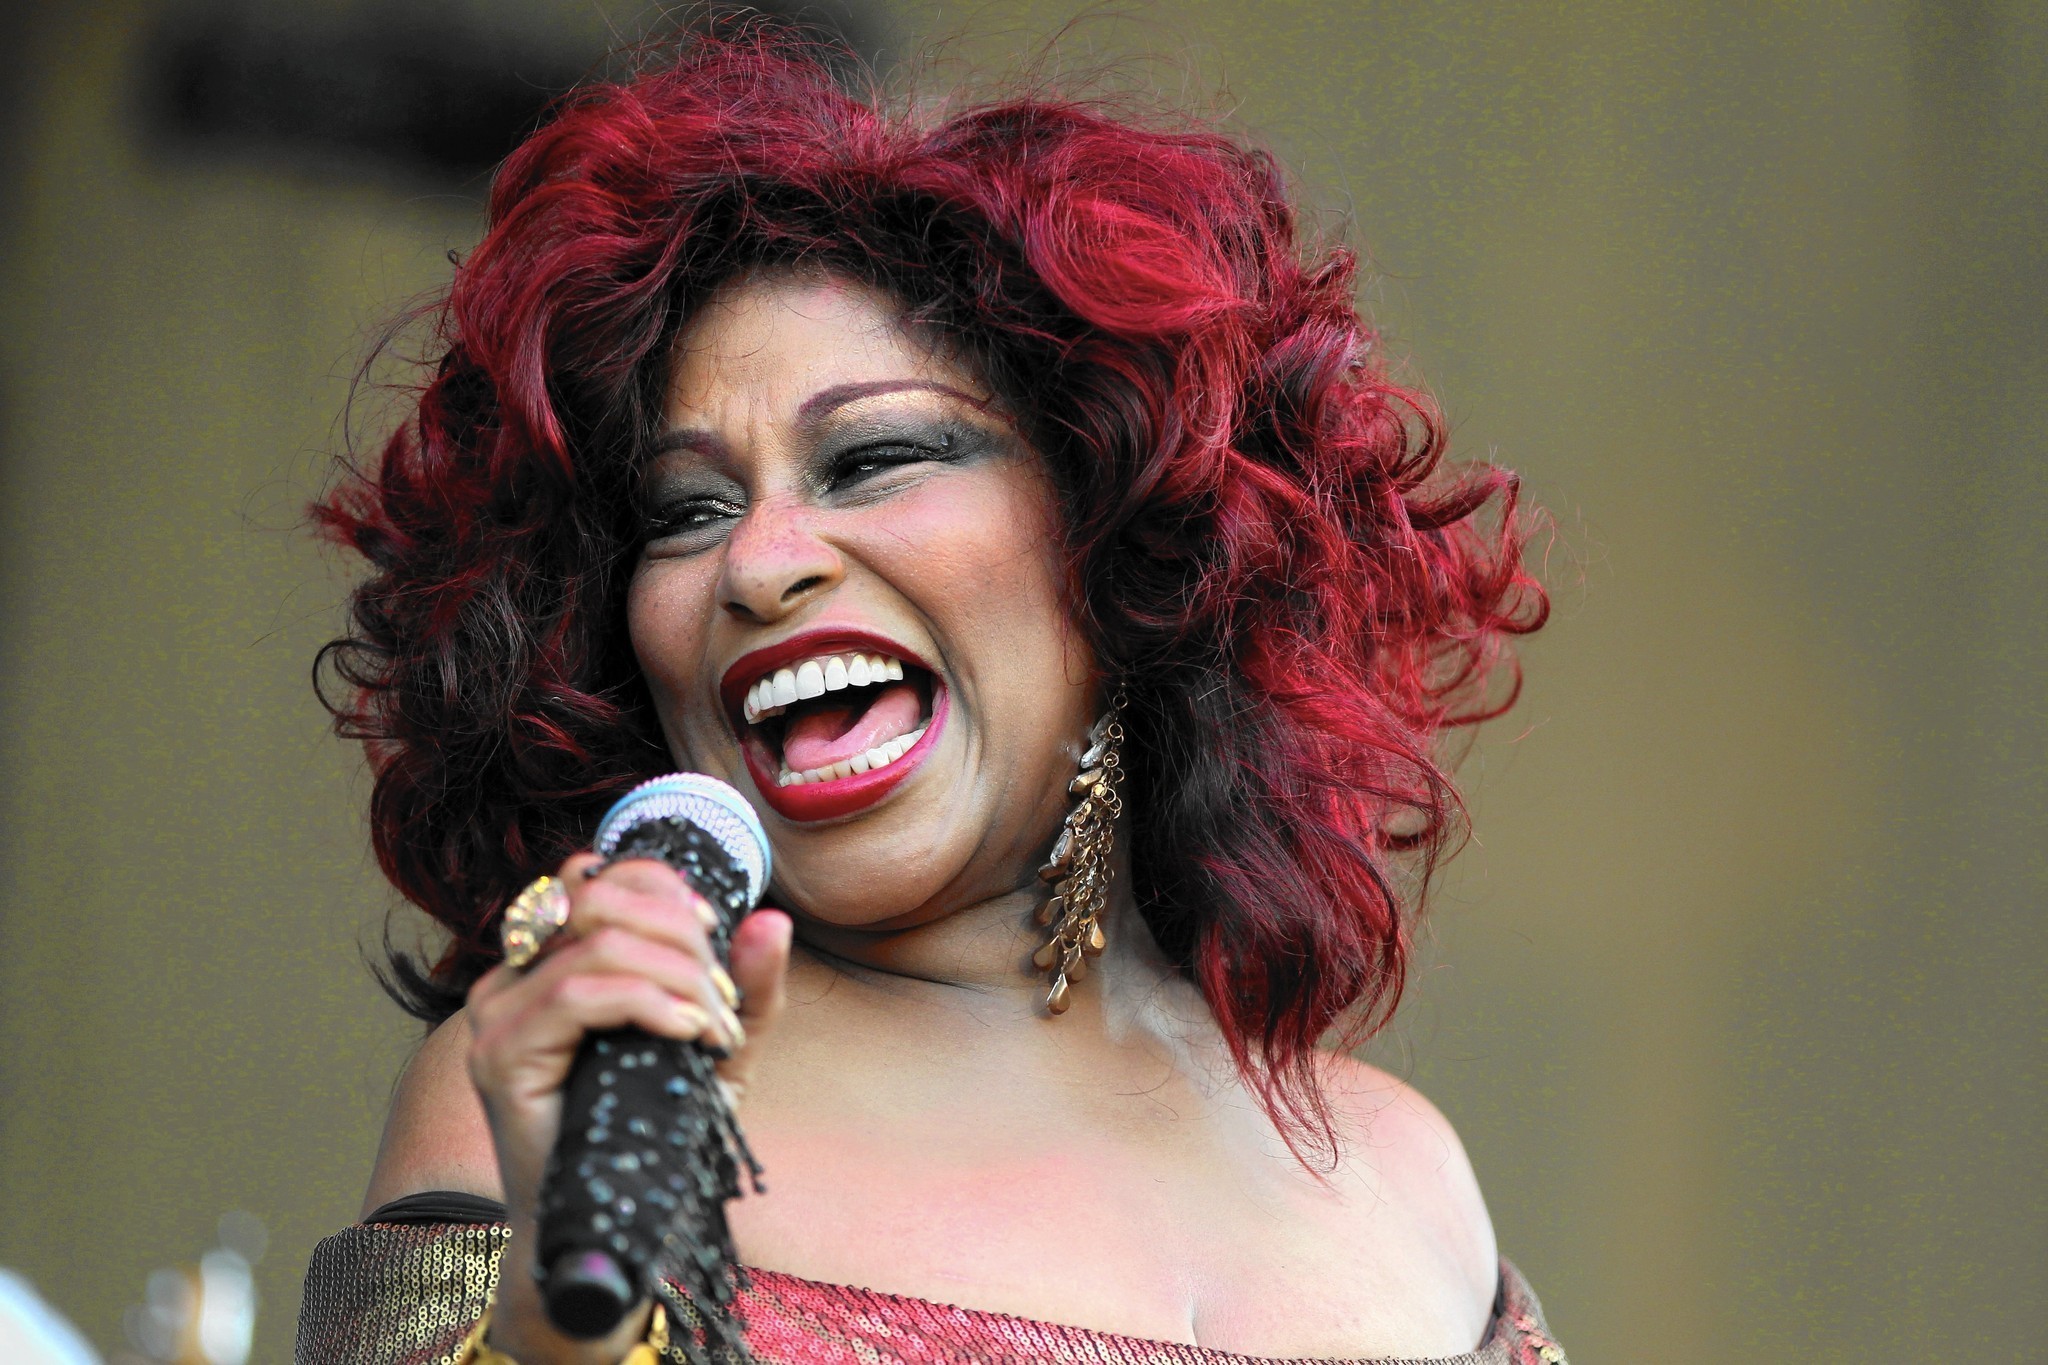 Chaka Khan just wants to sing for her people - Chicago Tribune2048 x 1365